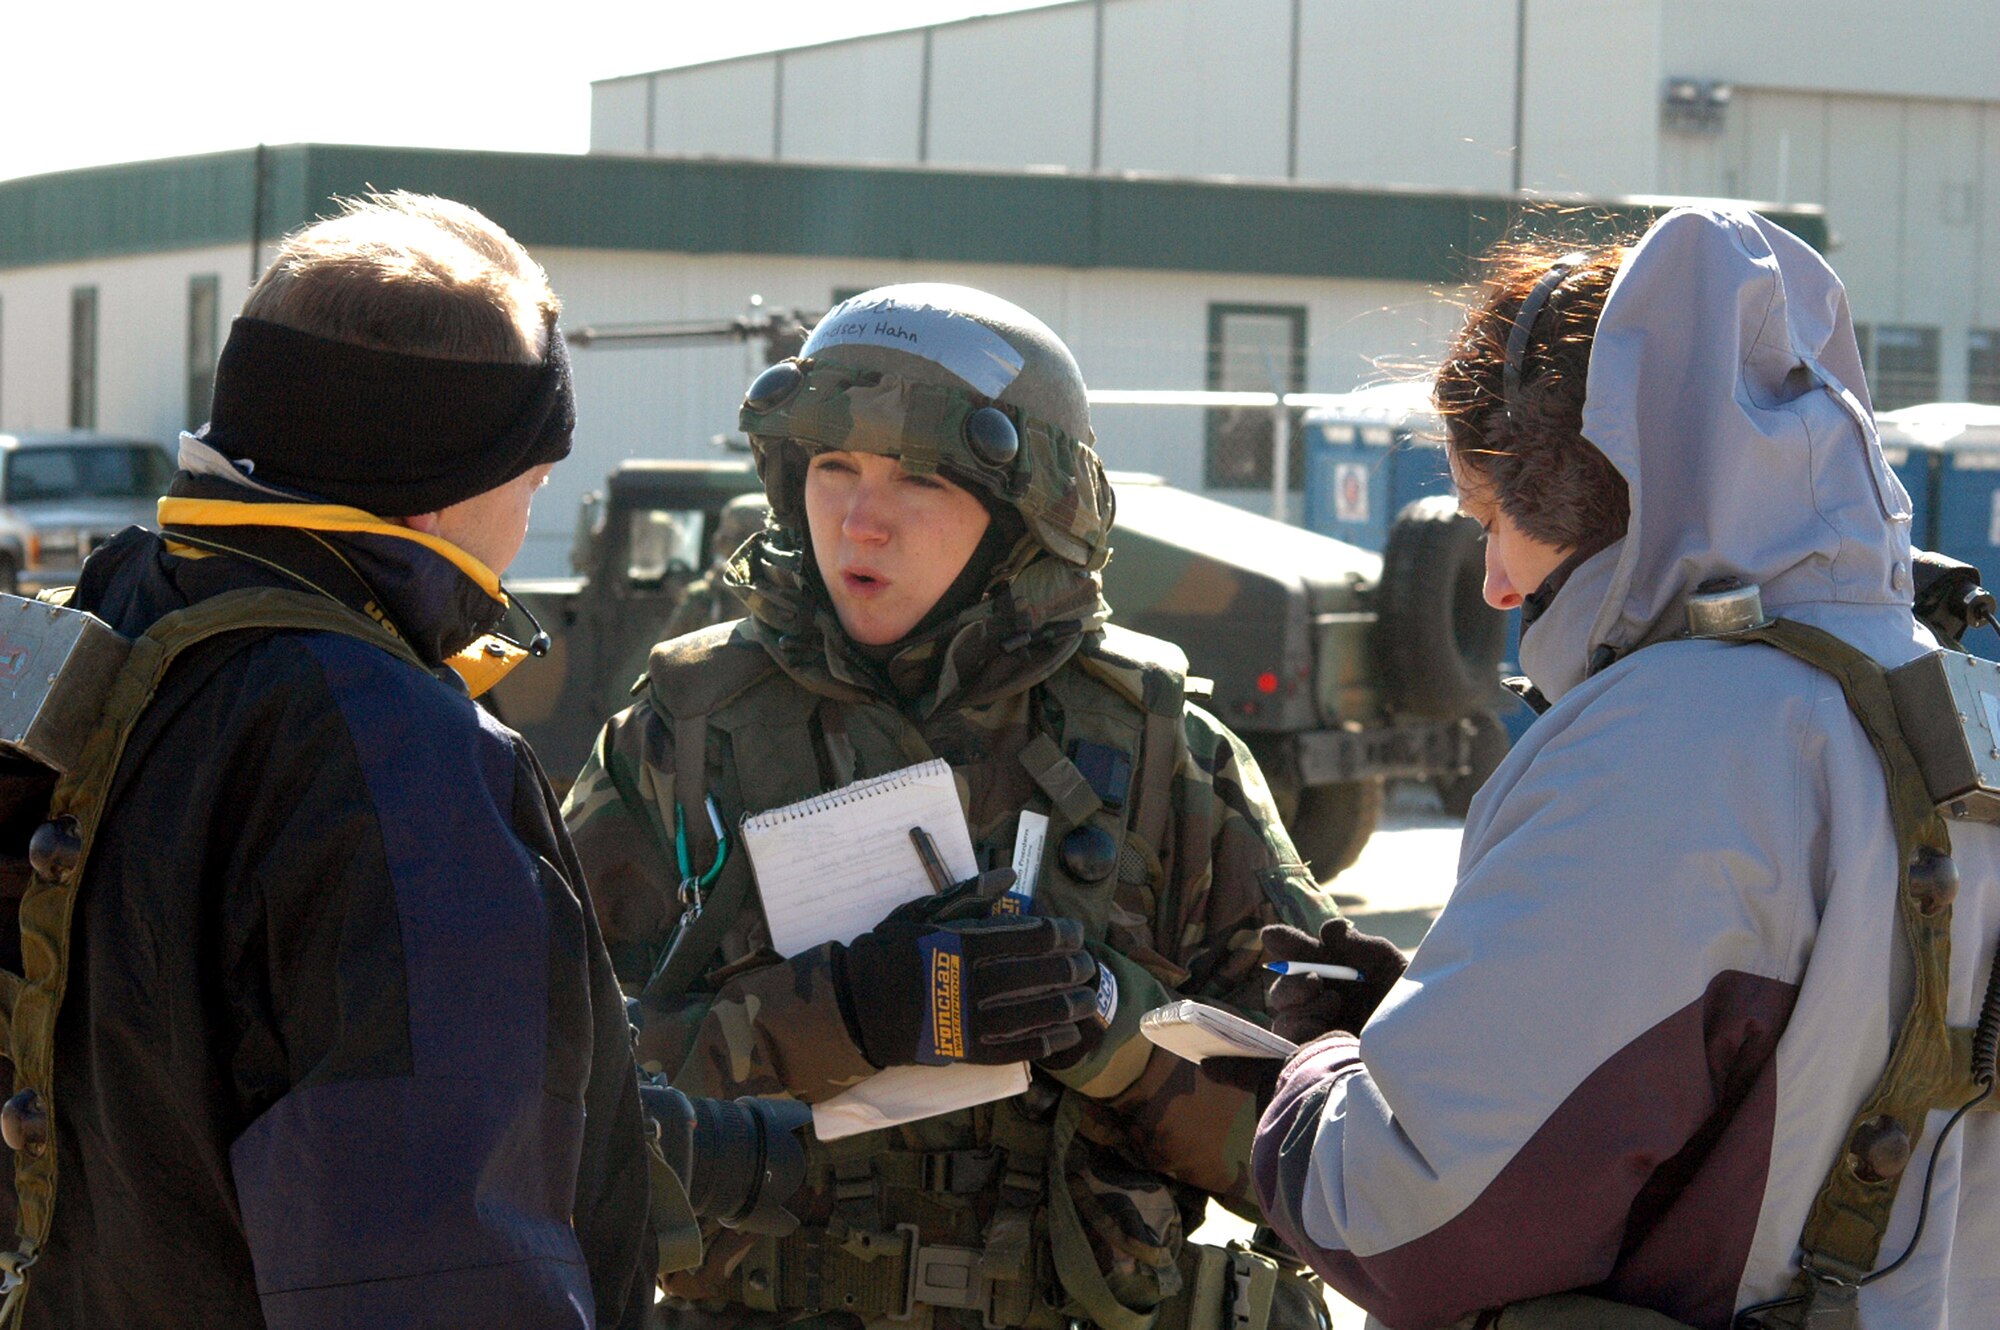 1st Lt. Lindsay Hahn talks with "host nation" reporters played by Tech. Sgt. Ron Rogers and Master Sgt. Melissa Phillips during a scenario for Exercise Eagle Flag 07-3 Feb. 10 at Naval Air Engineering Station Lakehurst, N.J. The exercise, operated by the Air Mobility Warfare Center's 421st Combat Training Squadron, tests and trains more than 400 Airmen on their expeditionary combat support skills. Lieutenant Hahn is a public affairs officer from Travis Air Force Base, Calif., Sergeant Rogers is a broadcaster from the Air Force News Agency in San Antonio, and Sergeant Phillips is a public affairs superintendent at Dover Air Force Base, Del. (U.S. Air Force Photo/Tech. Sgt. Scott T. Sturkol)